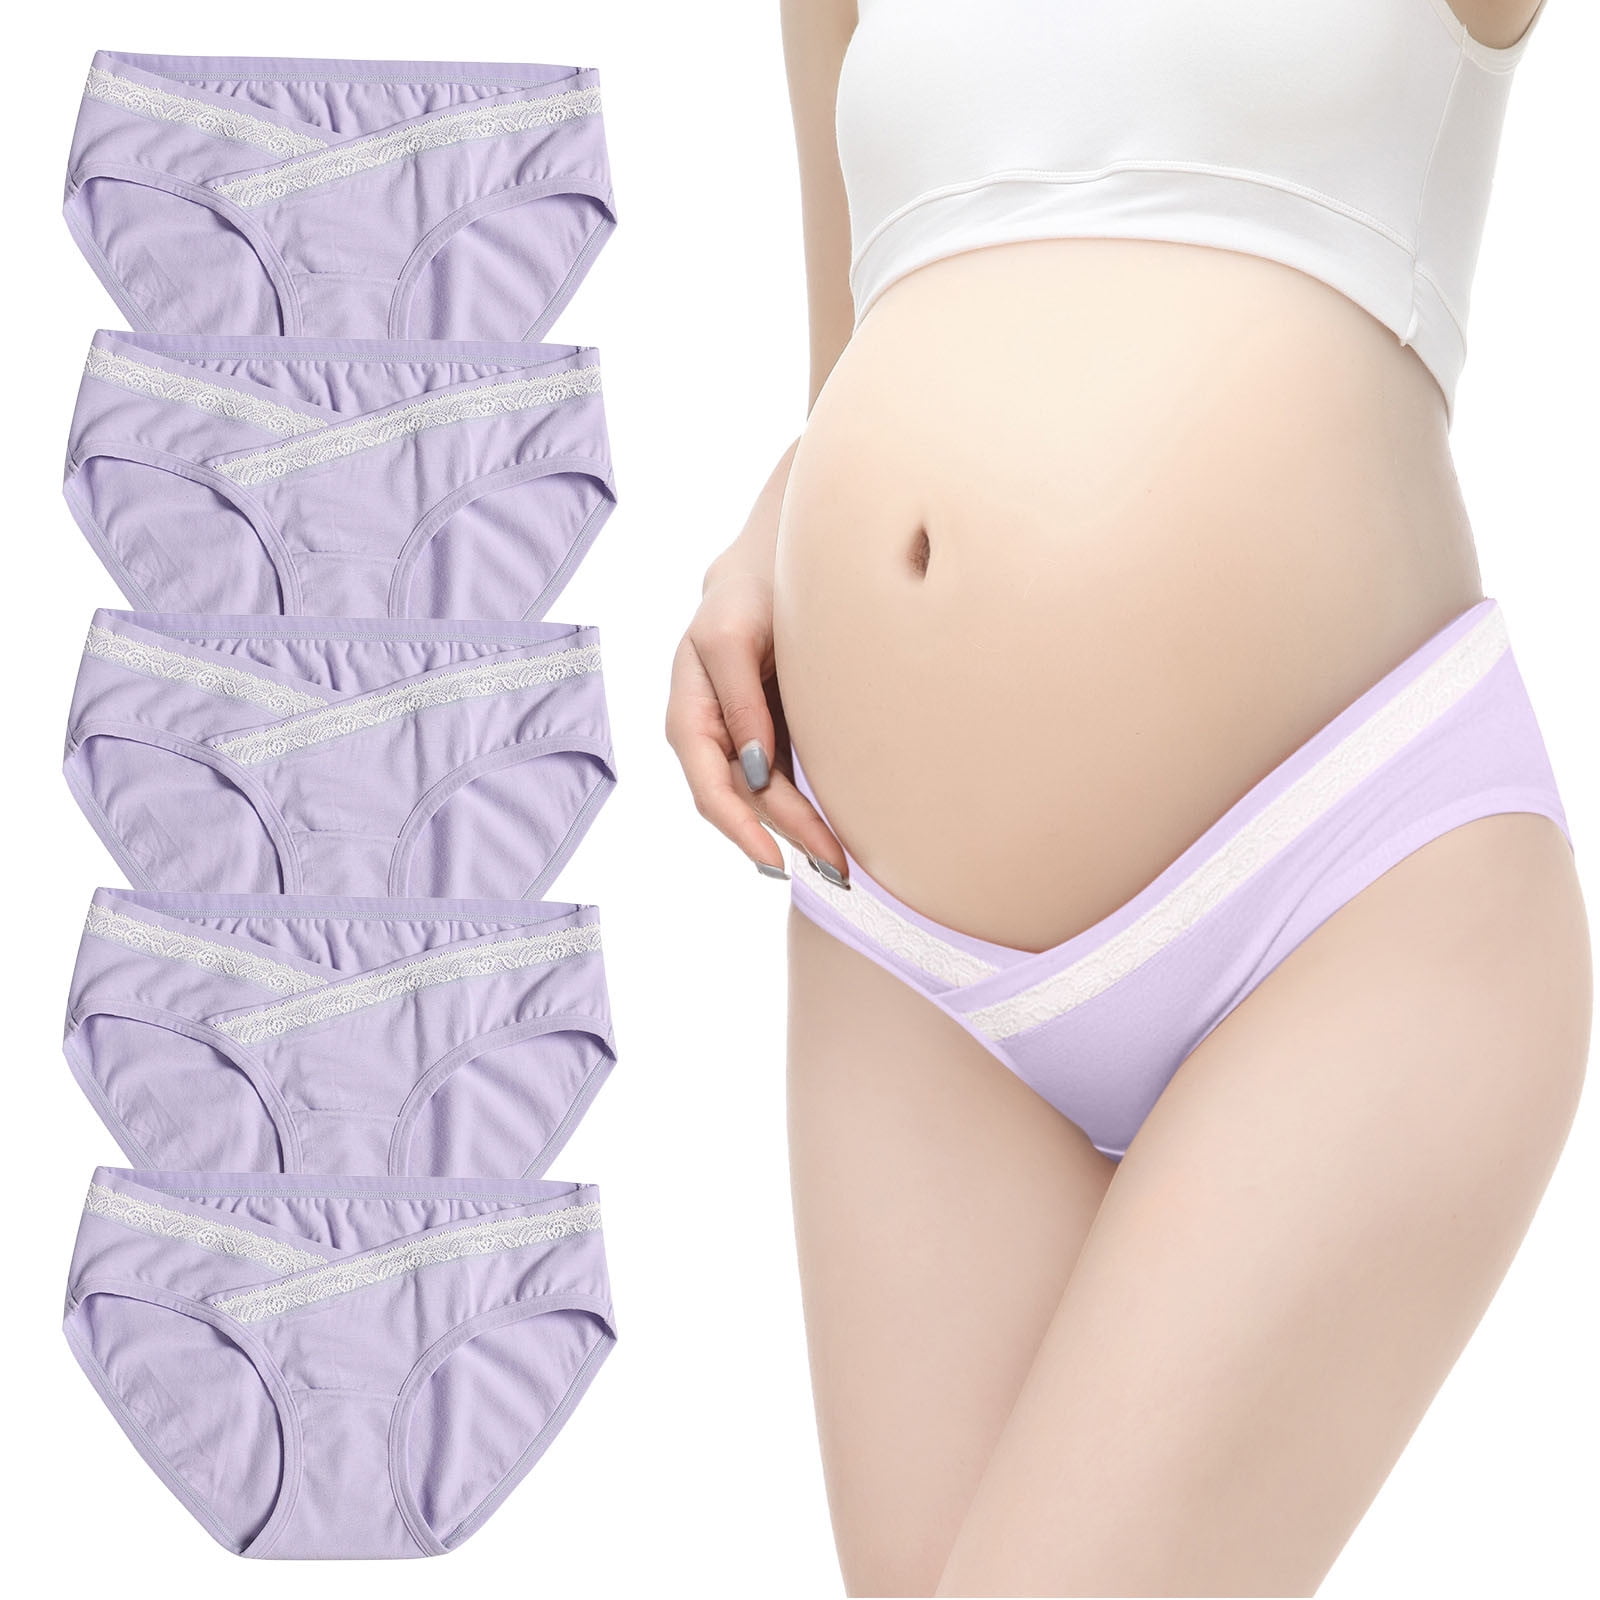 Kayannuo Cotton Underwear For Women Christmas Clearance Women's Lace Low  Waist Abdomen Support Seamless V-shaped Maternity Underwear Purple 